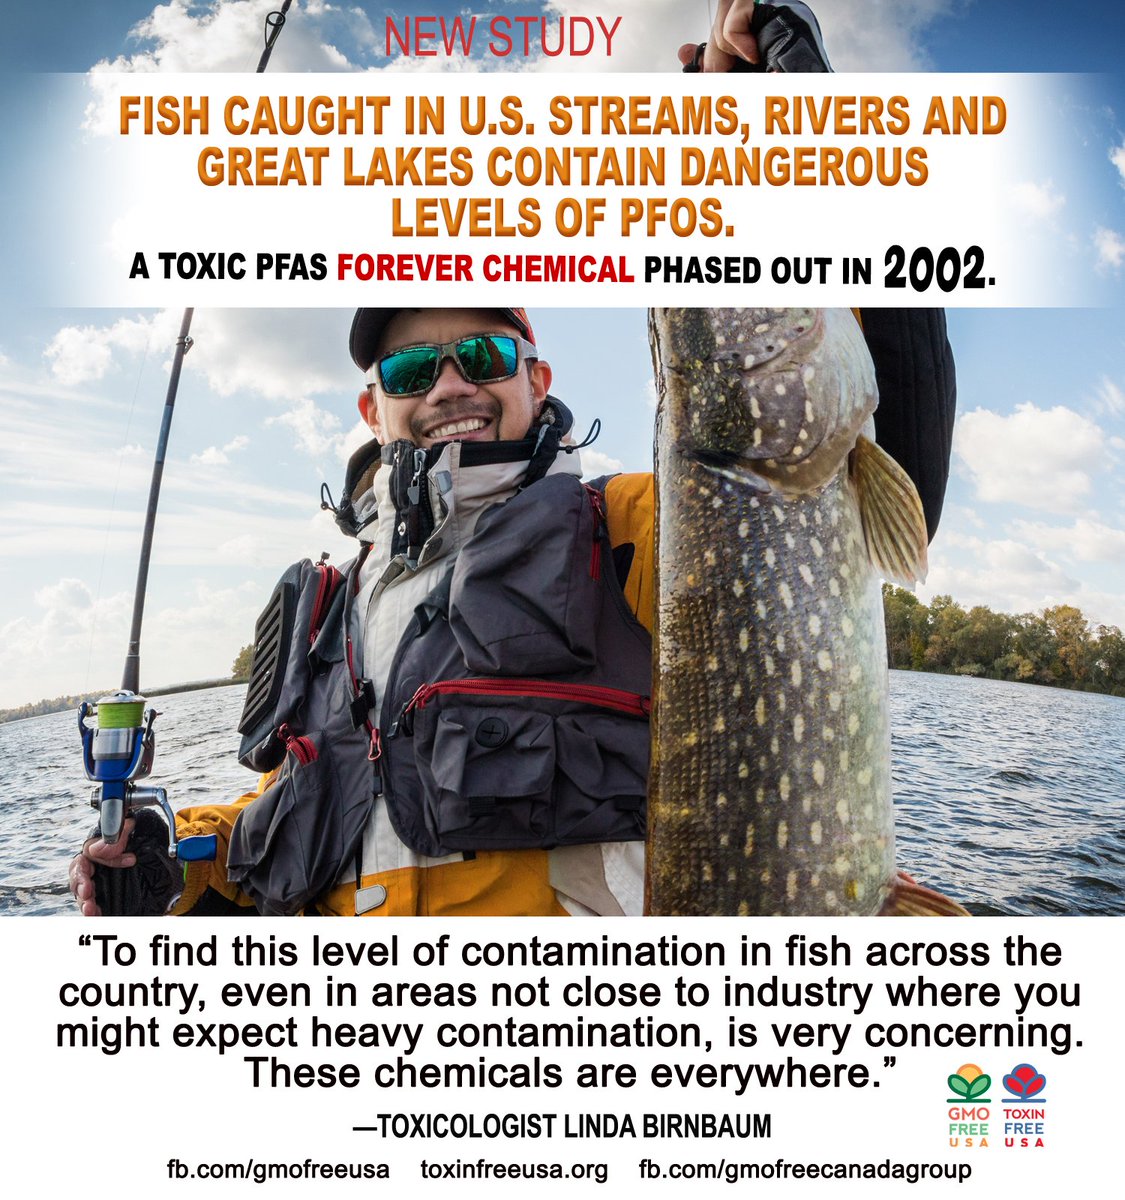 Freshwater fish caught in streams and rivers across the continental U.S. and the Great Lakes contain very dangerous levels of #PFOS, a toxic #PFAS #foreverchemical: cnn.com/2023/01/17/hea…